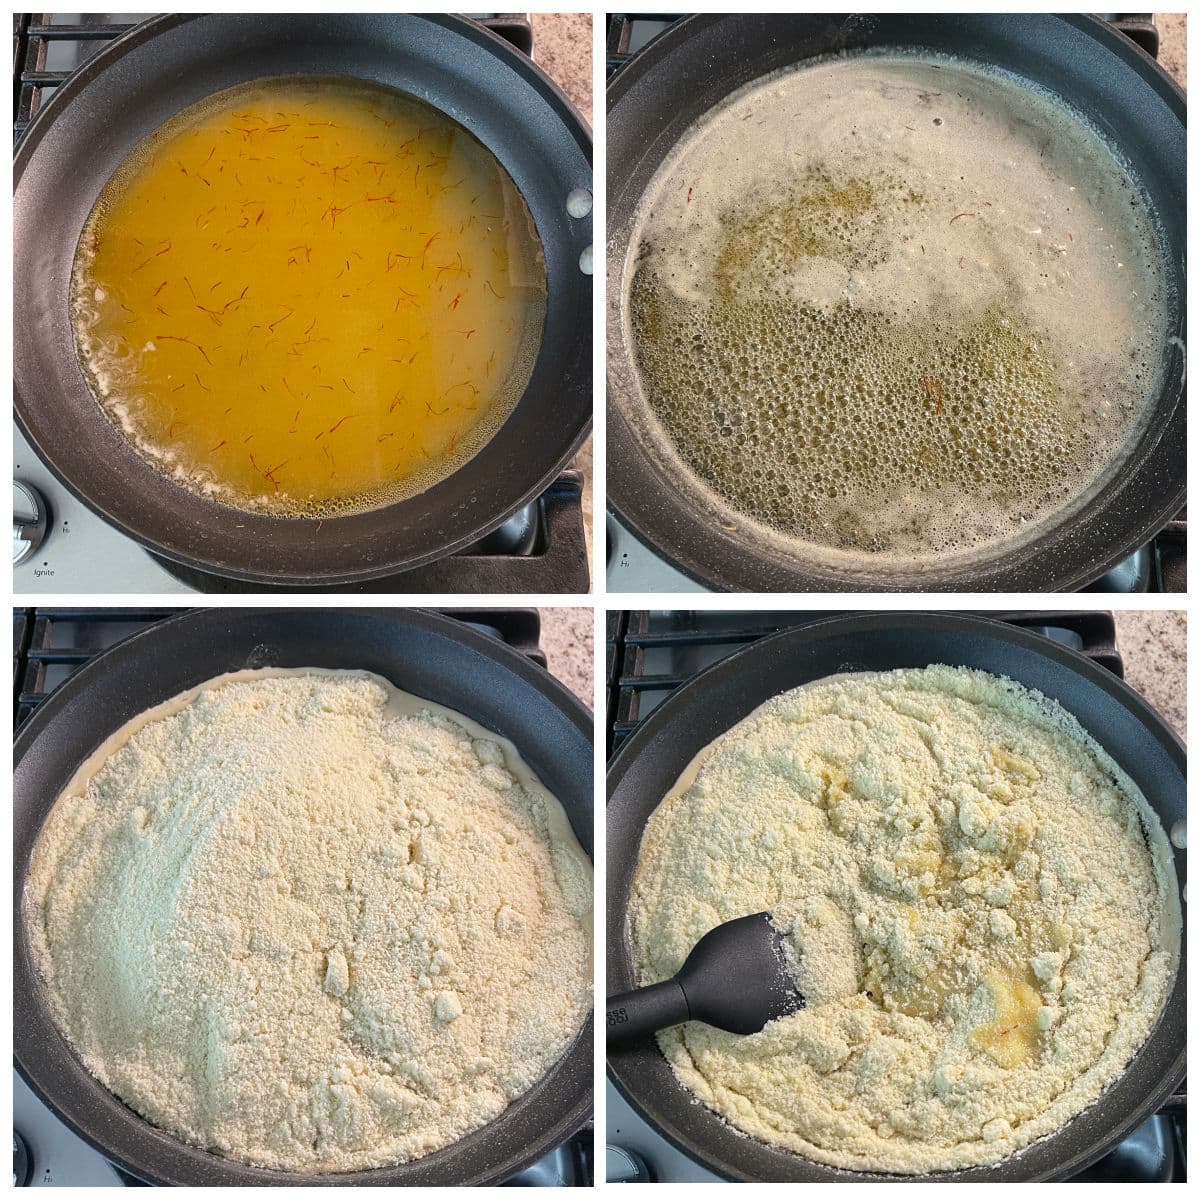 Melting sugar with water and adding almond flour